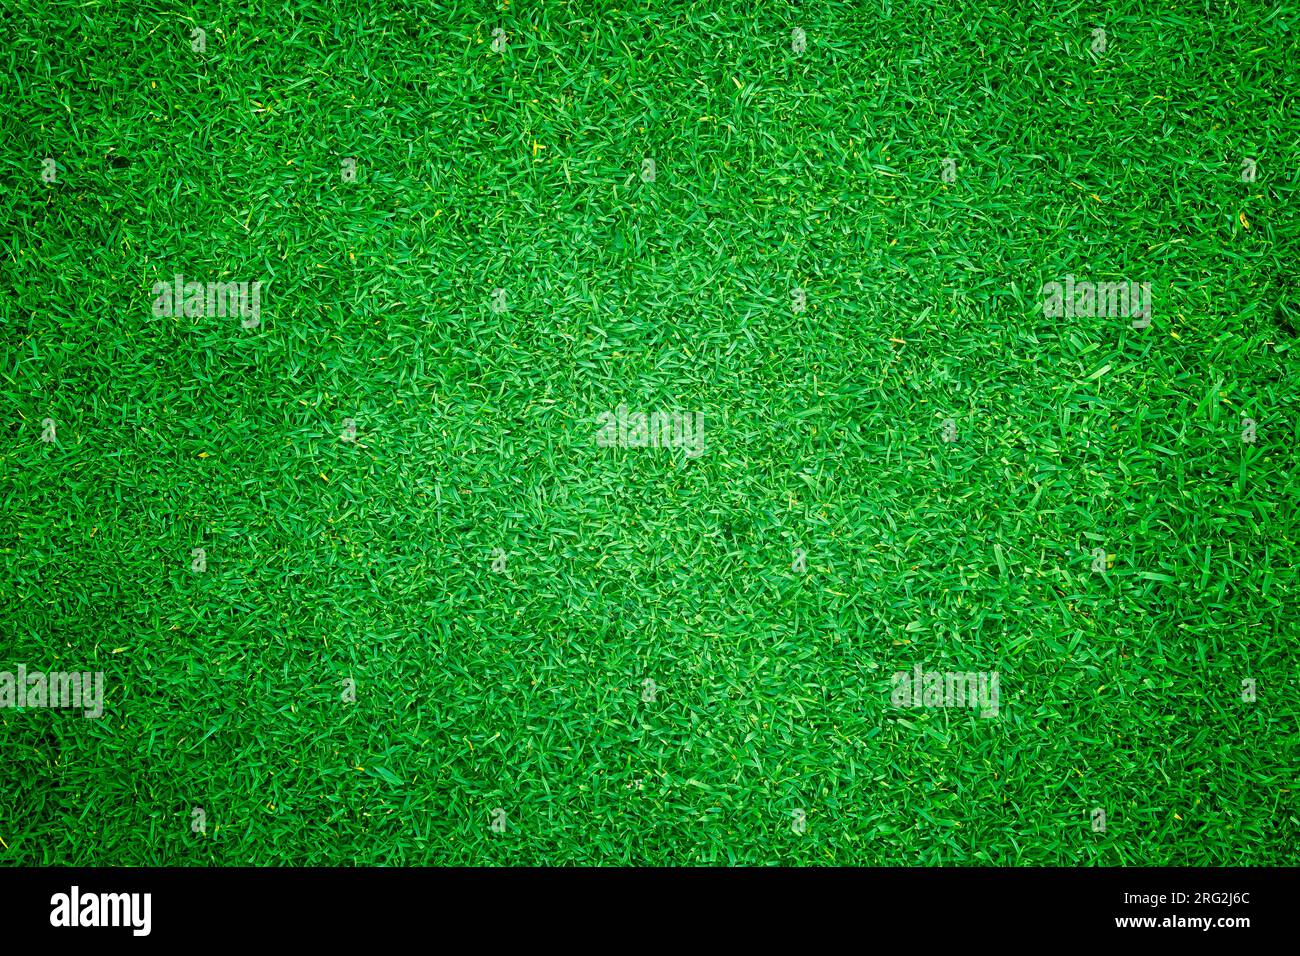 Fond d'herbe verte pelouse abstract surface Banque D'Images